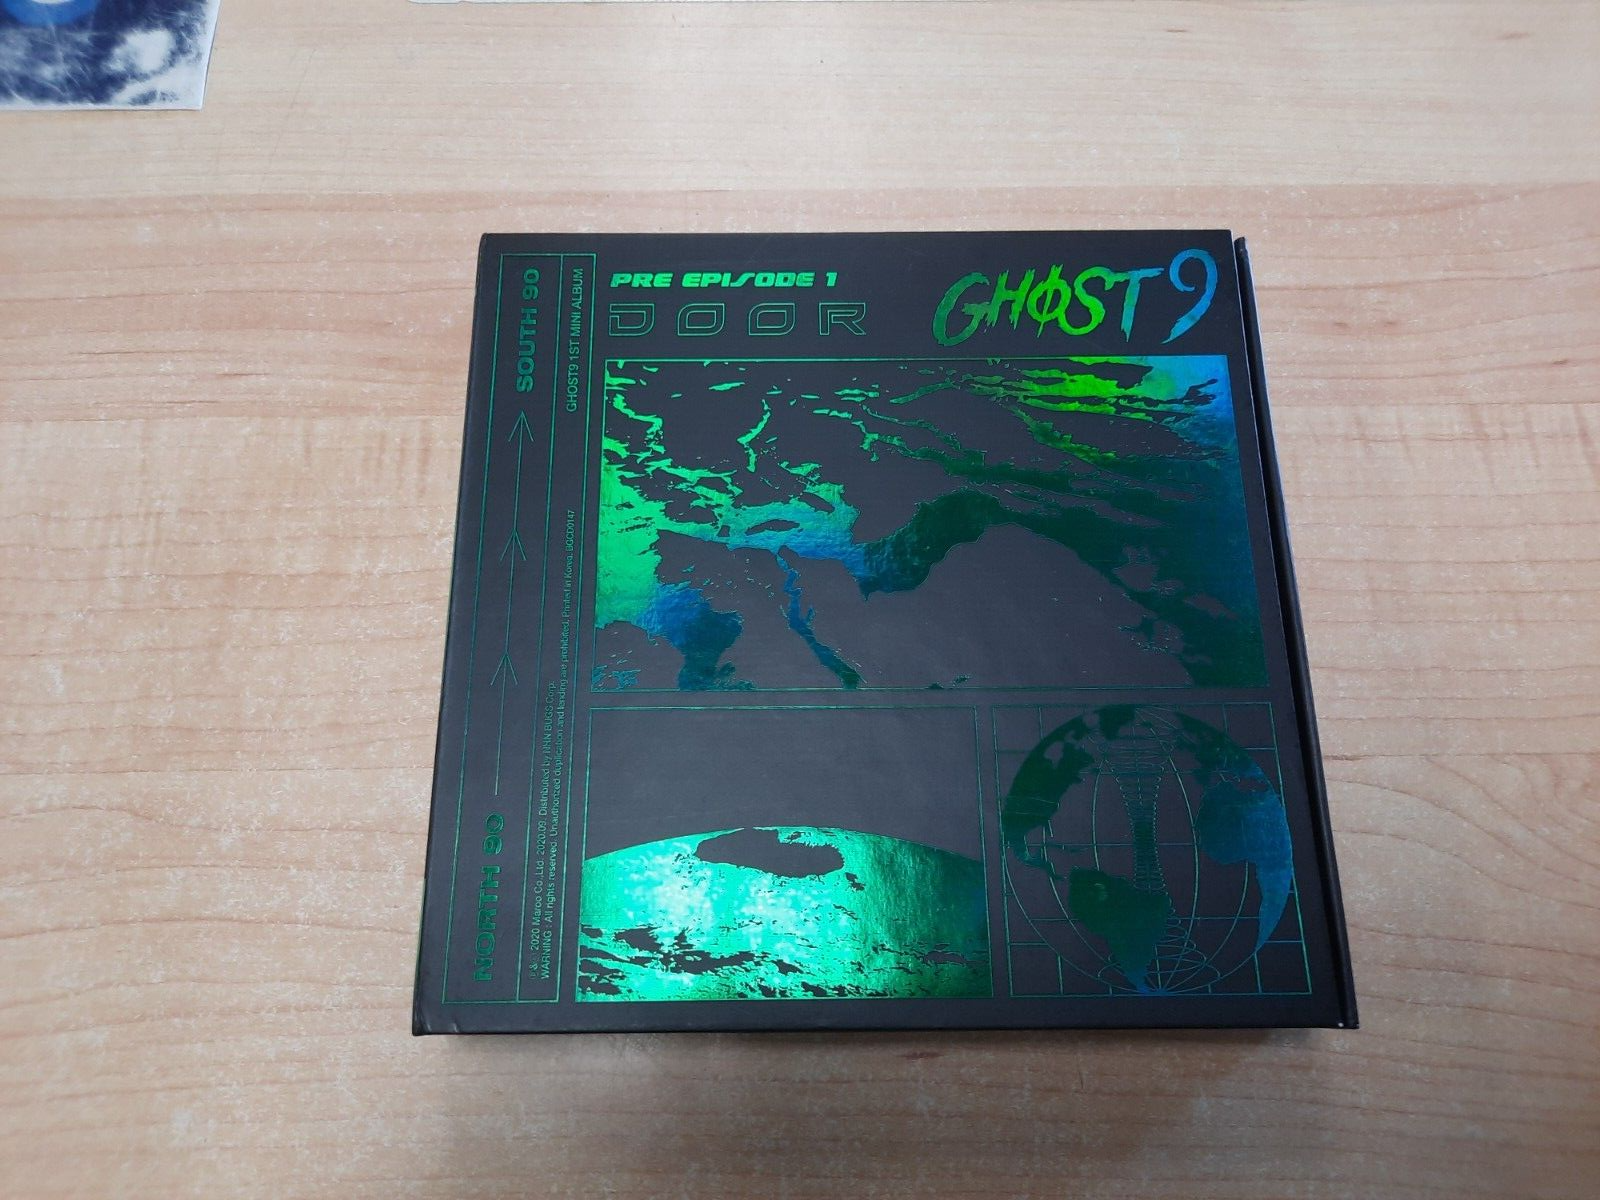 Primary image for Ghost9 - Pre Episode 1: Door (incl. 76pg Photobook, 18pg Lyric Booklet